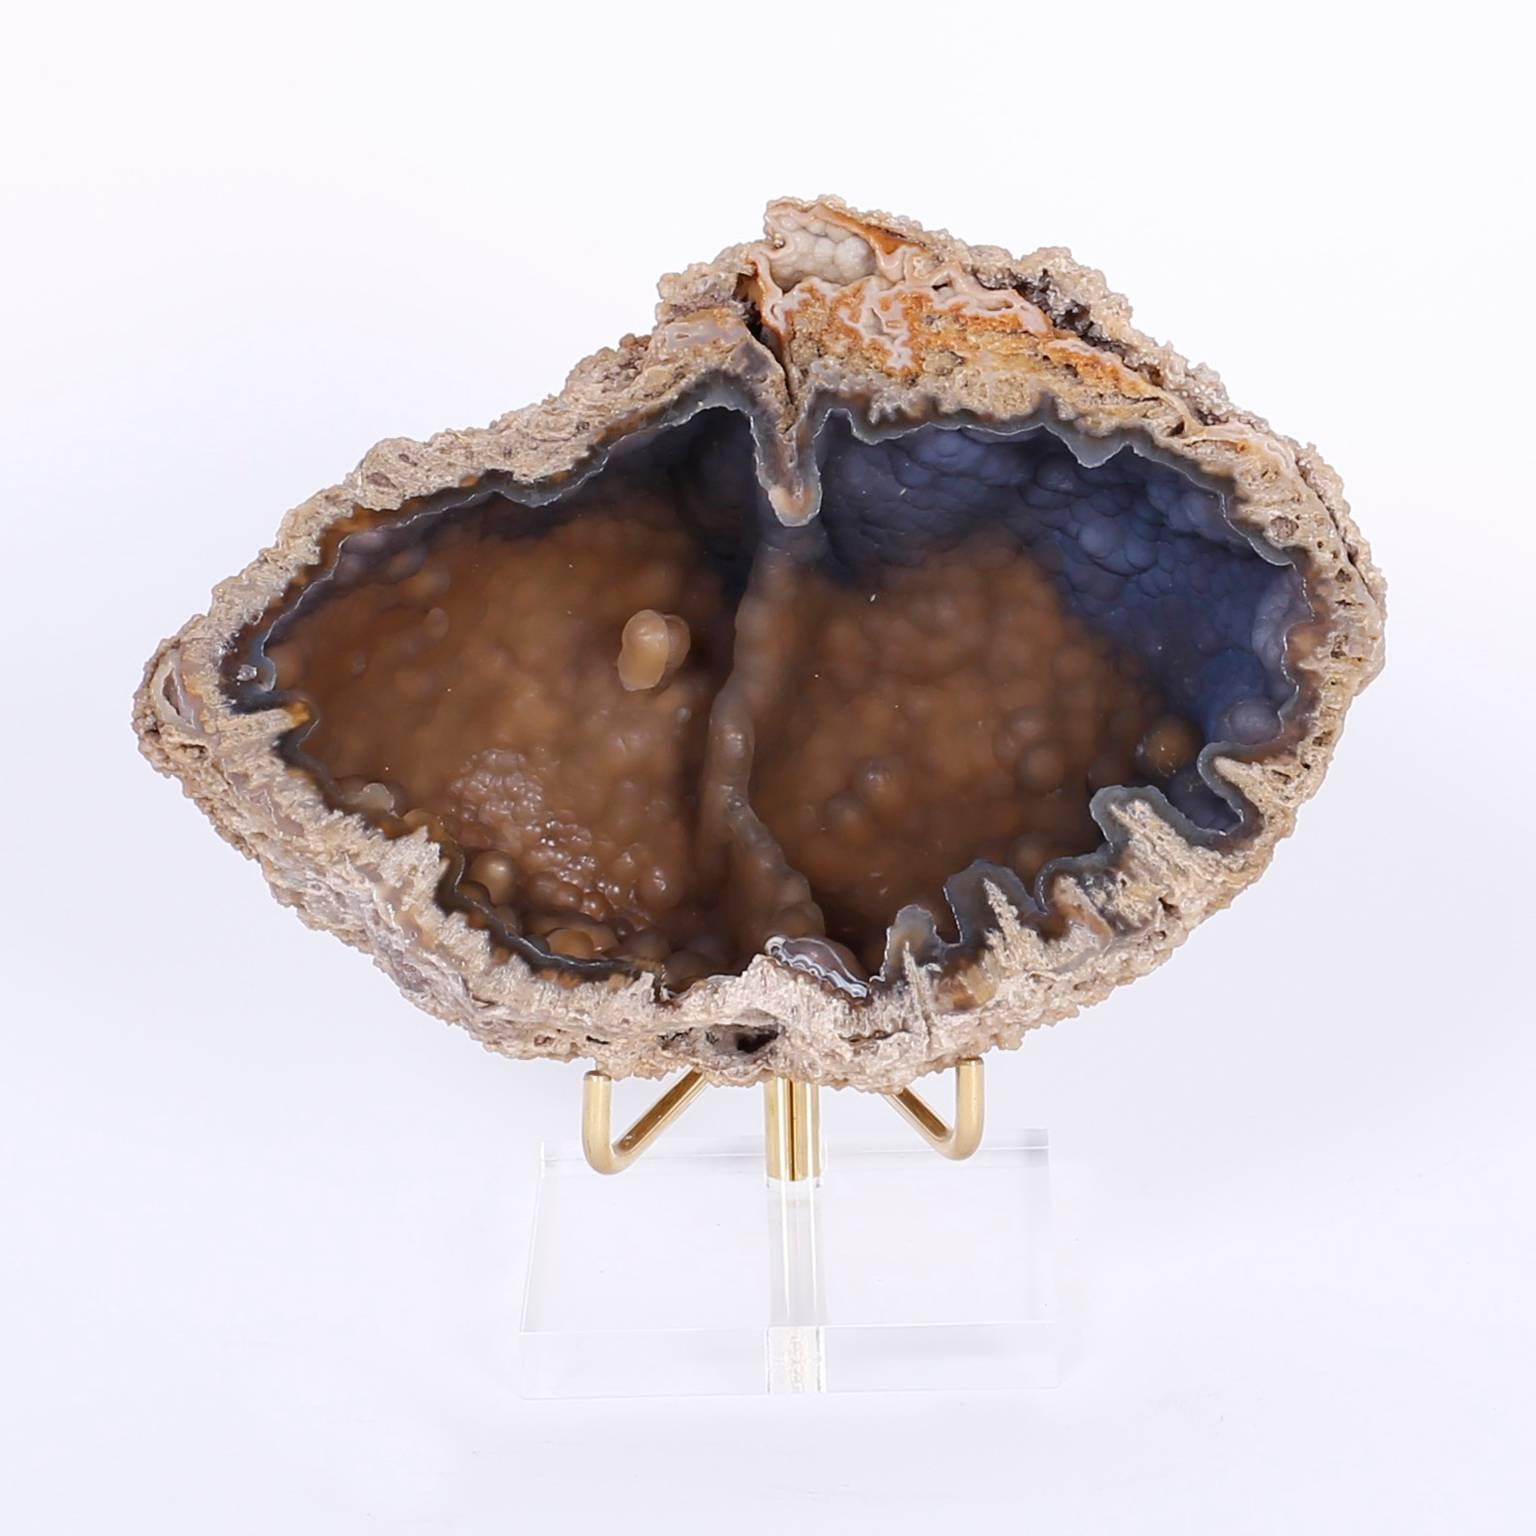 Fascinating cross sections of an agatized coral specimen that display a brilliant organic composition of textures, colors, and form. Florida designated this fossilized coral as the official state stone in 1976. Presented on lucite and brass stands